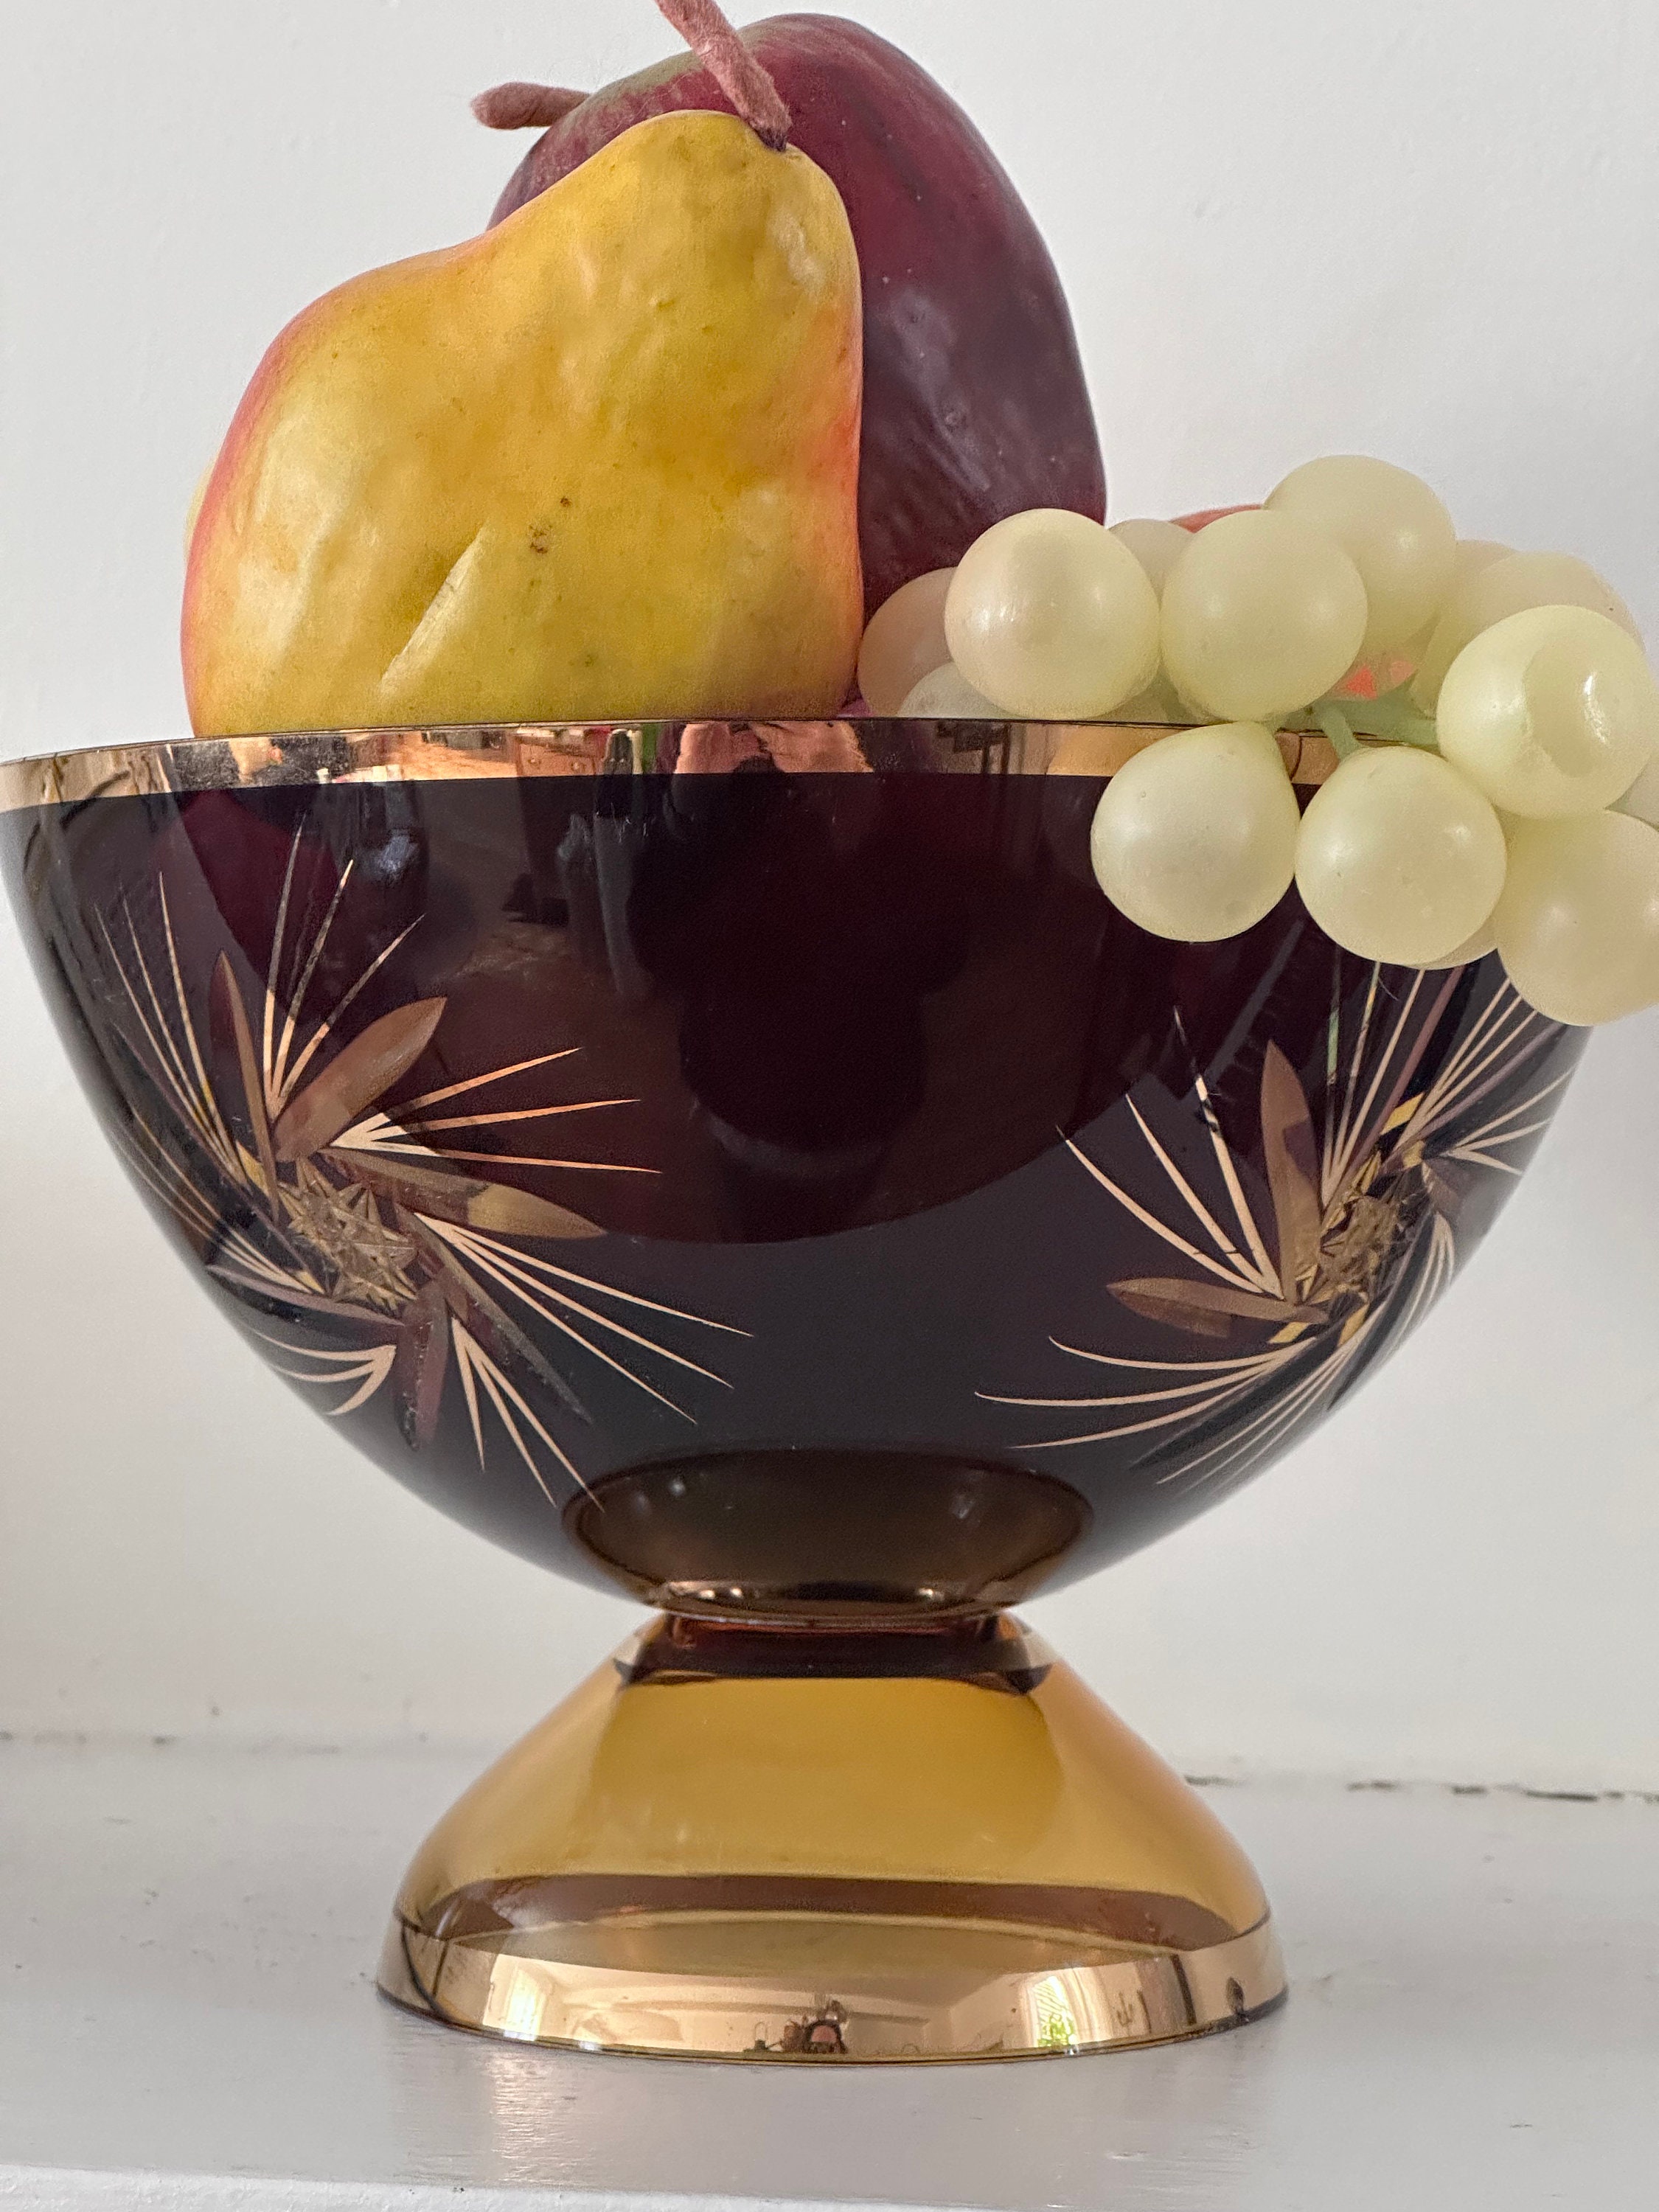 Lot - Two fruitwood bowls with decorative spheres and faux fruit